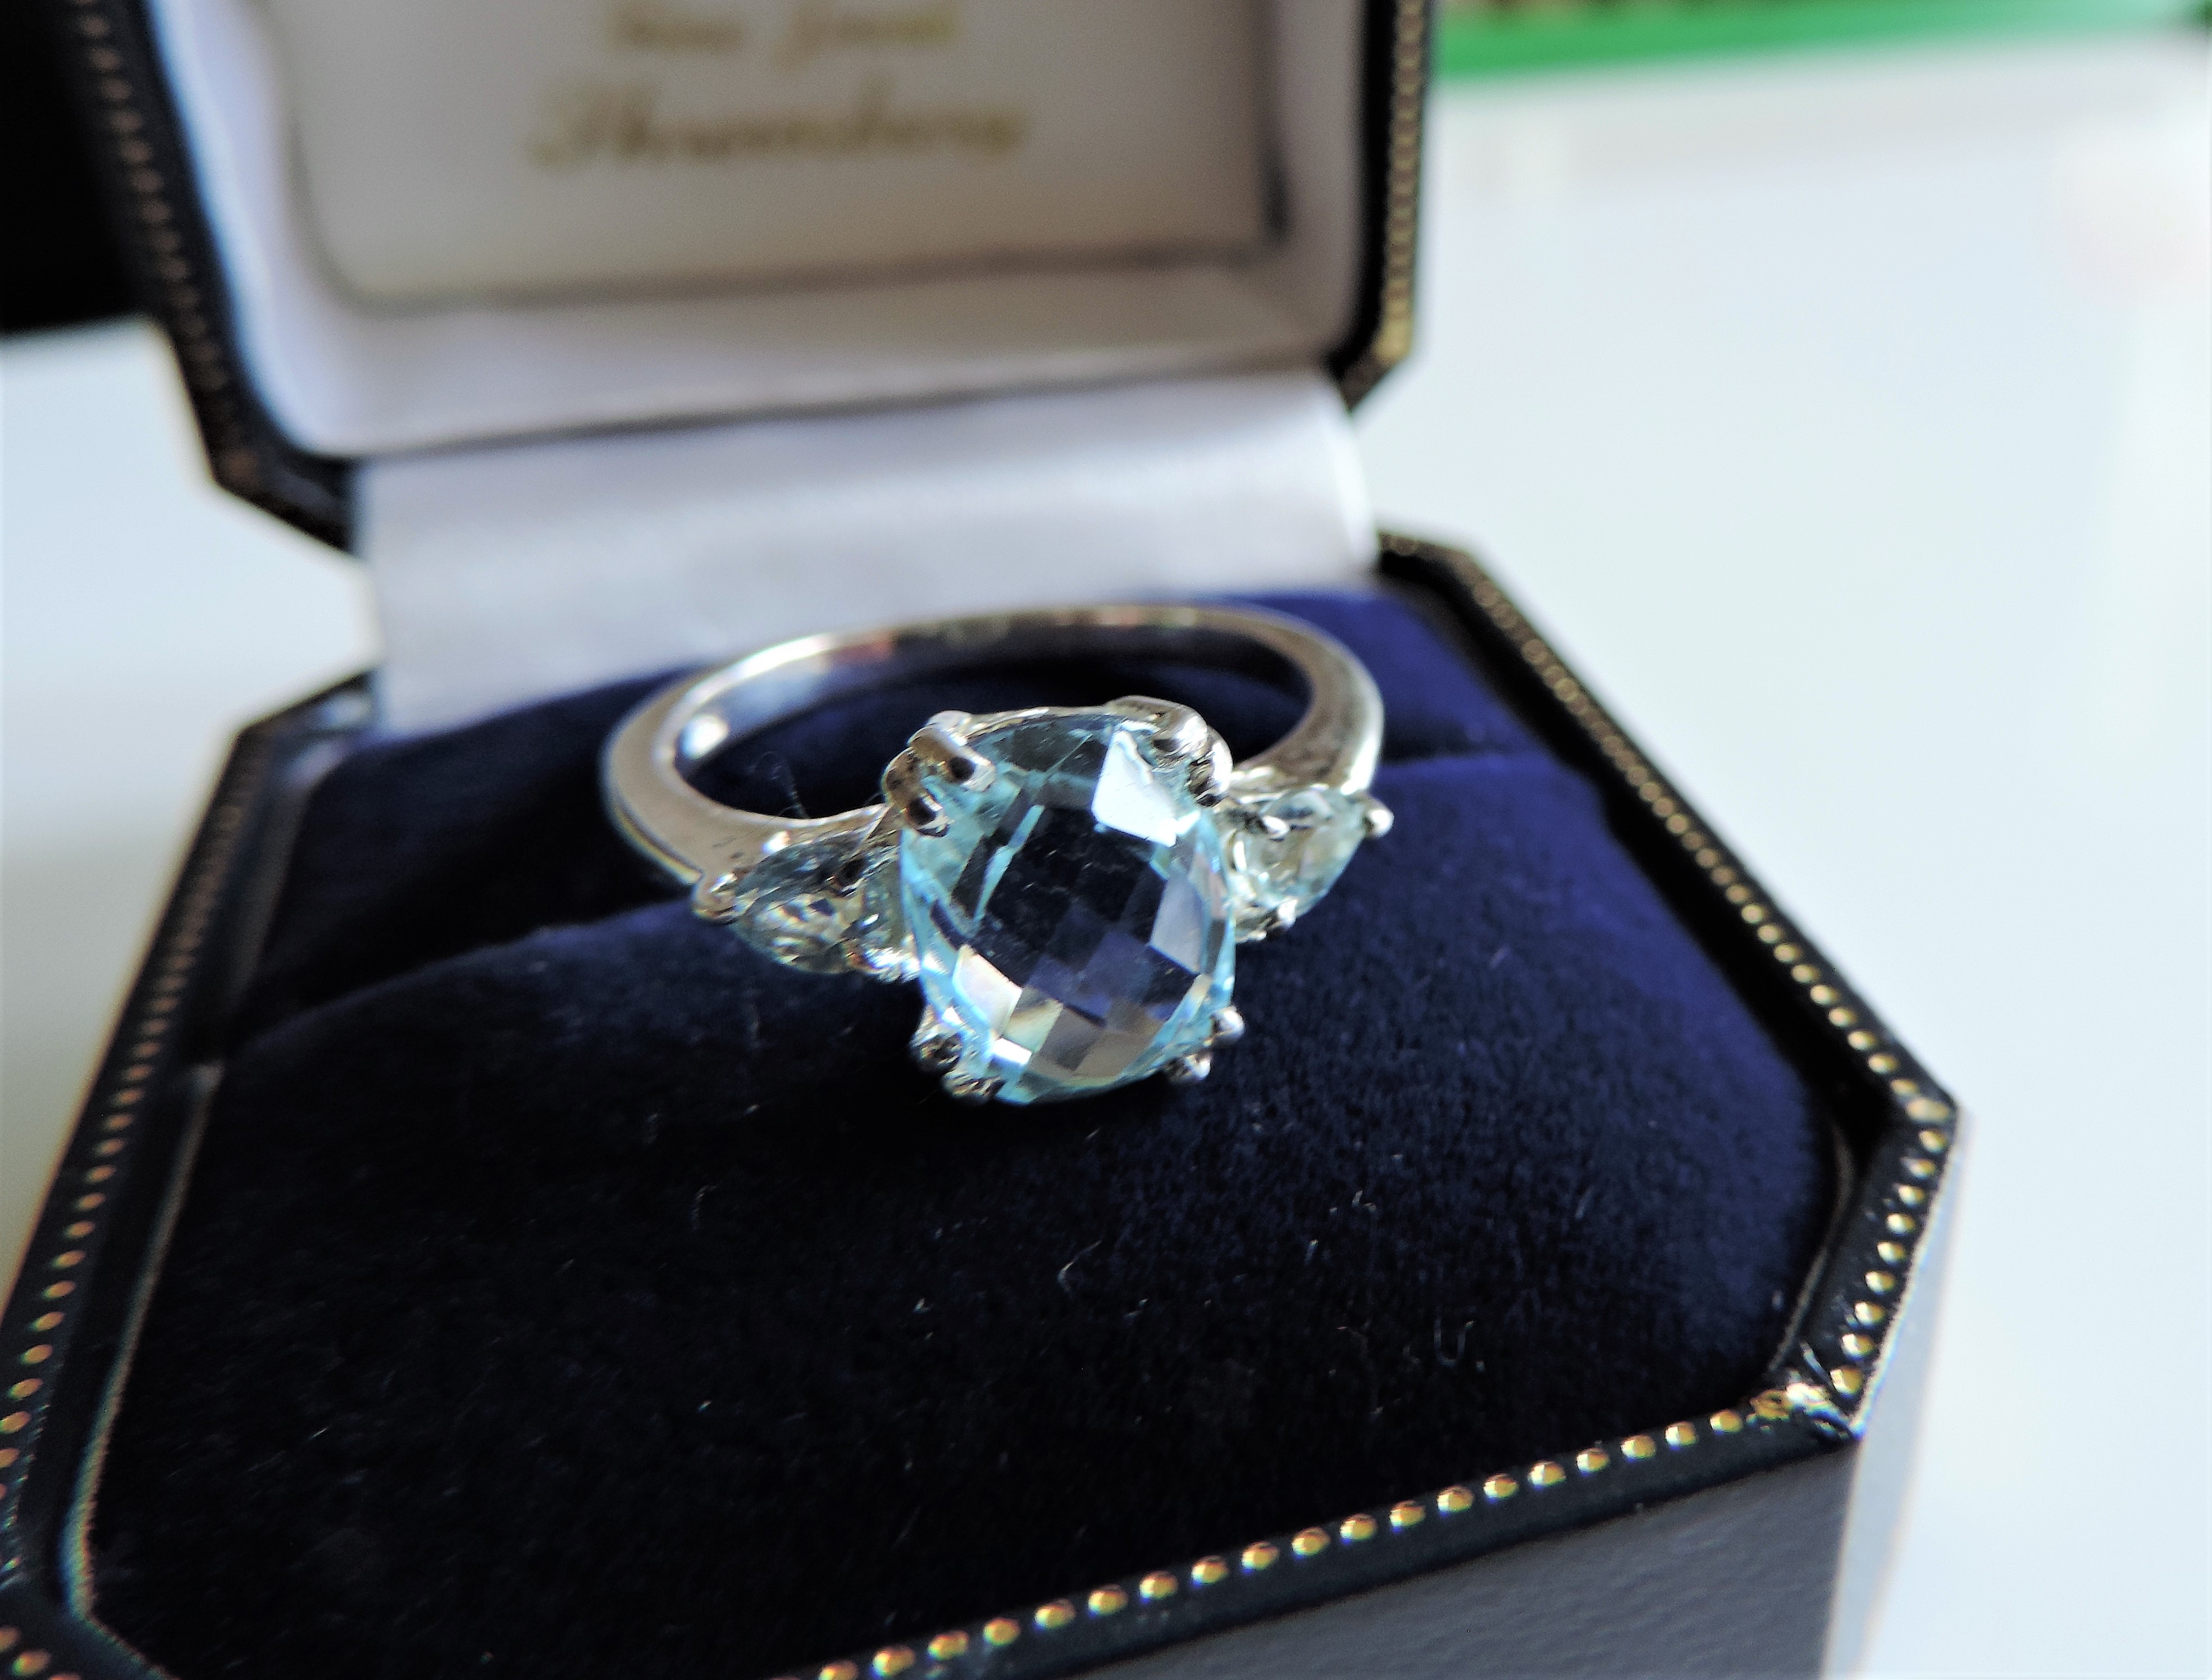 Sterling Silver 3.9ct Blue Topaz Gemstone Ring - Image 4 of 7